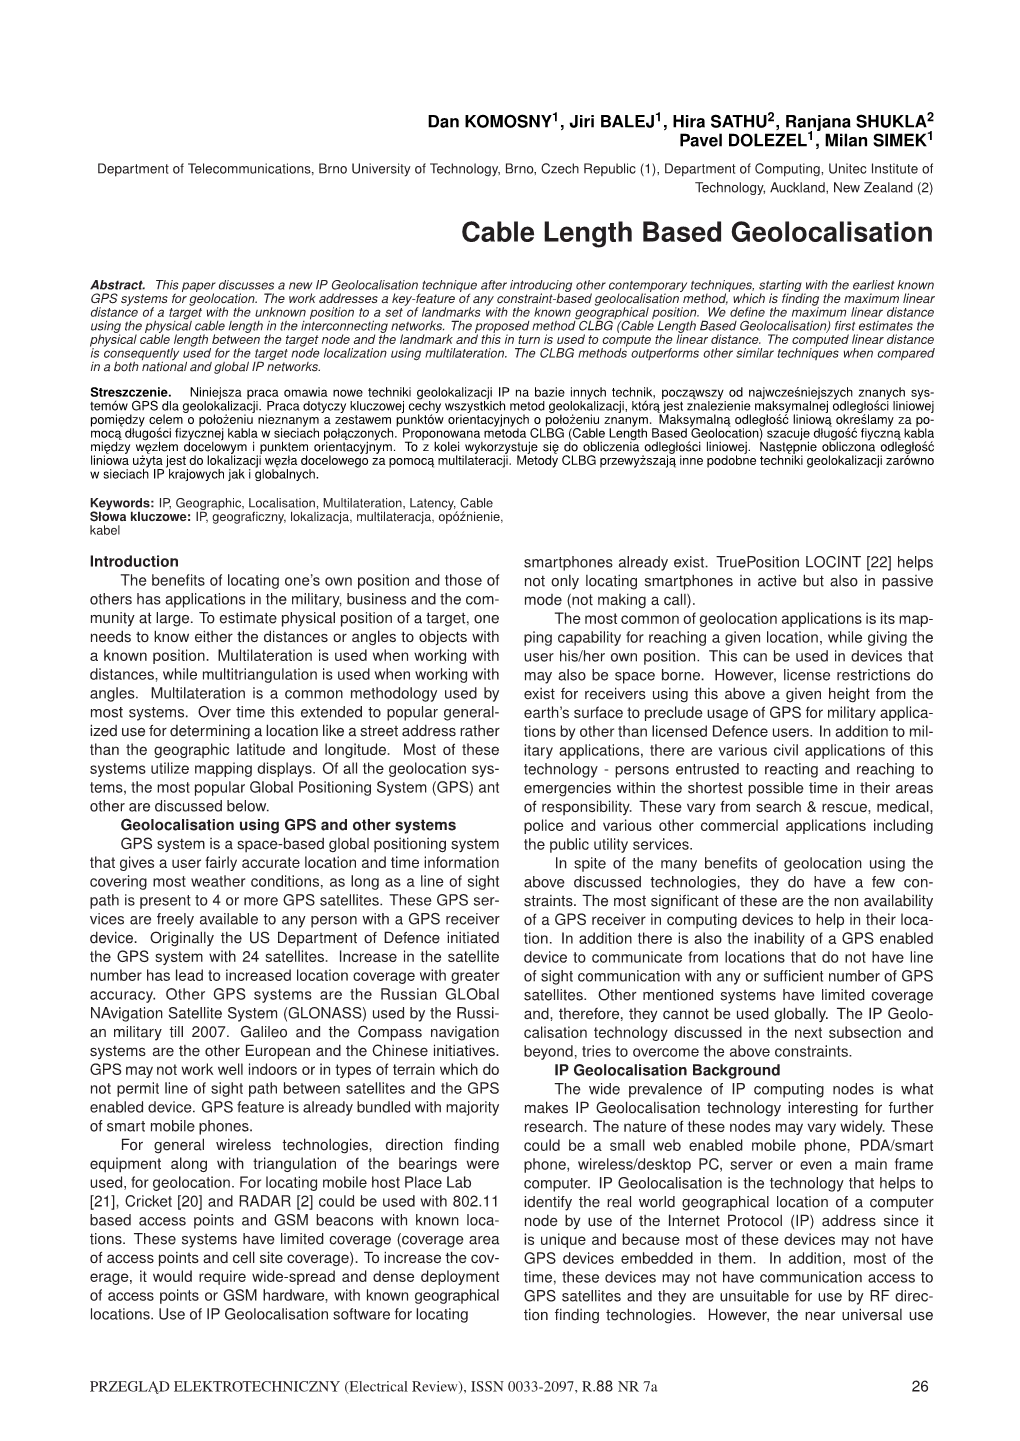 Cable Length Based Geolocalisation